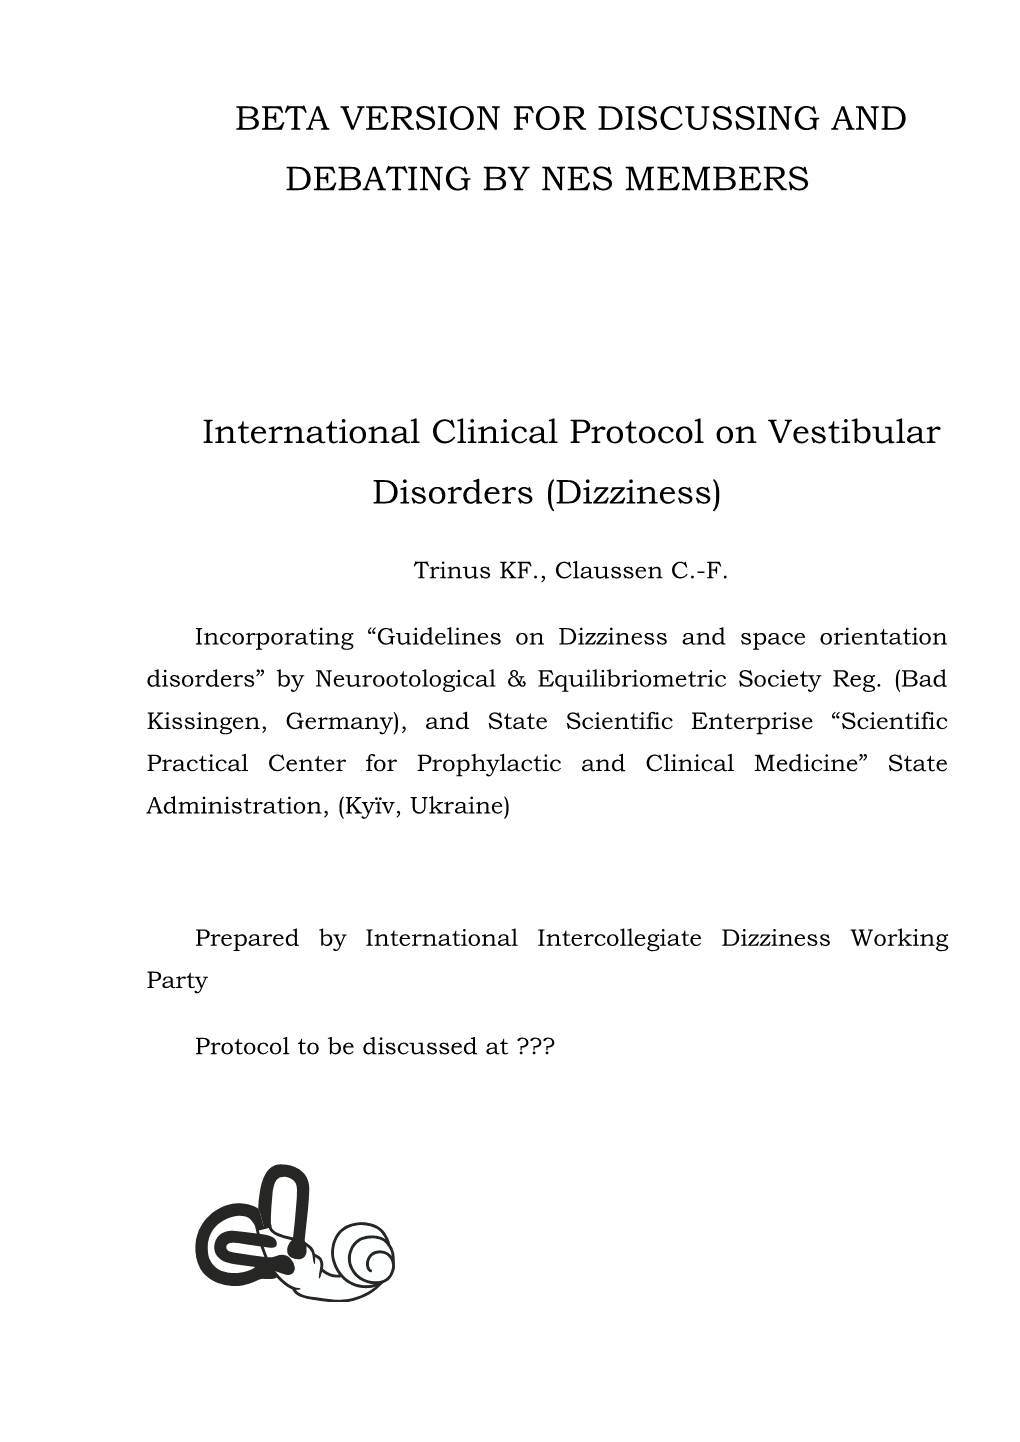 BETA VERSION for DISCUSSING and DEBATING by NES MEMBERS International Clinical Protocol on Vestibular Disorders (Dizziness)